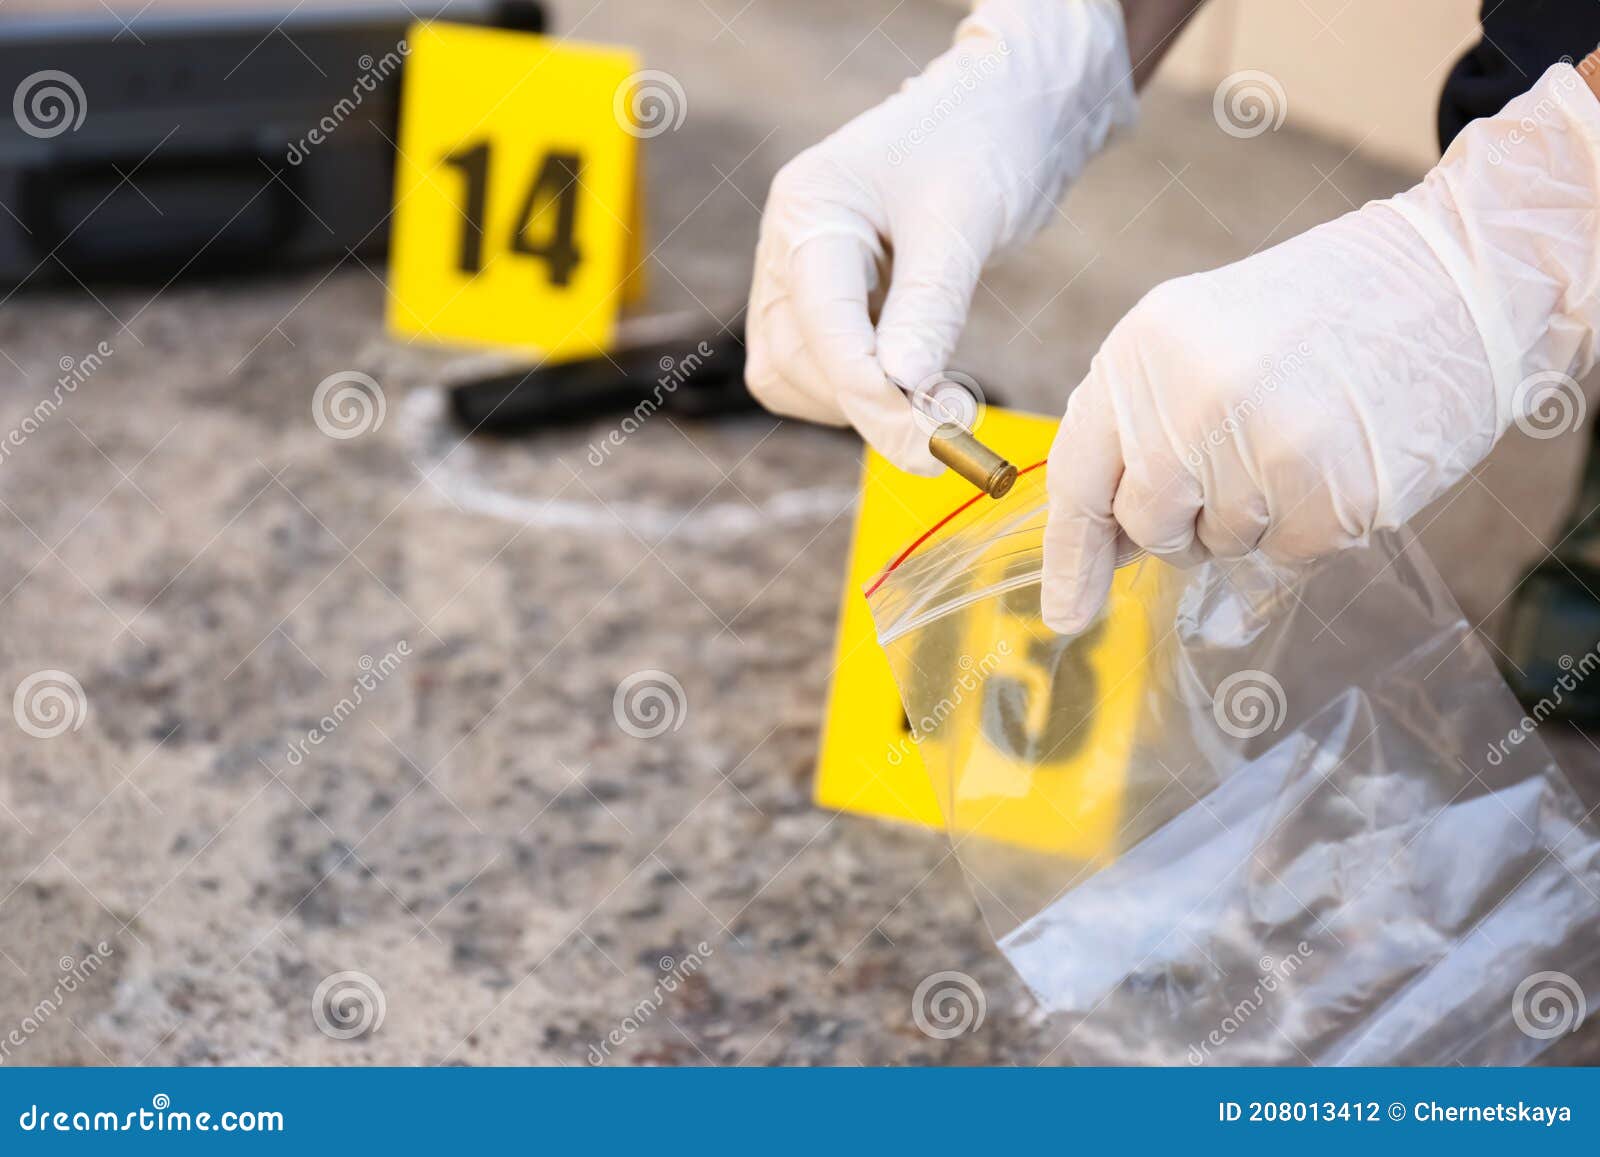 detective collecting evidences at crime scene, closeup